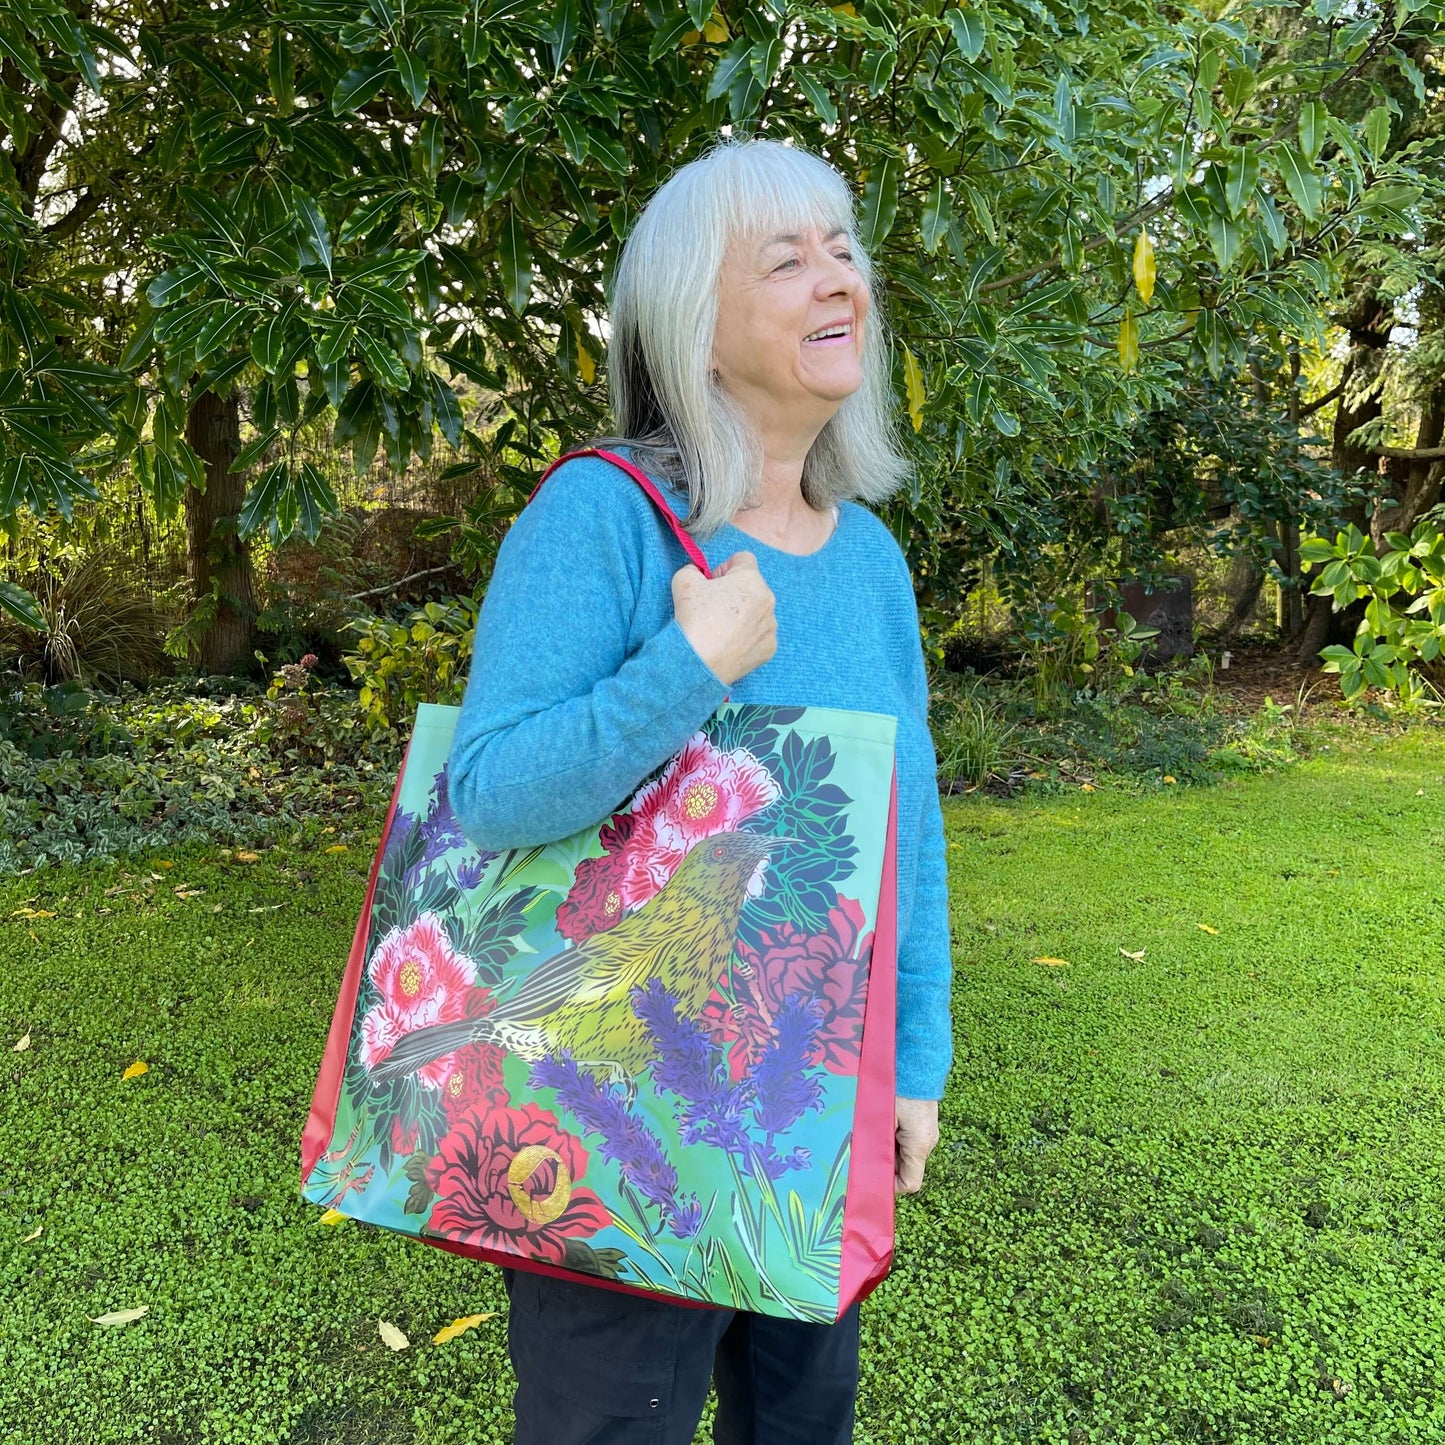 Woman with a tote bag over her arm. The vibrant coloured tote bag features Peony flowers & a bellbird by artist Flox.